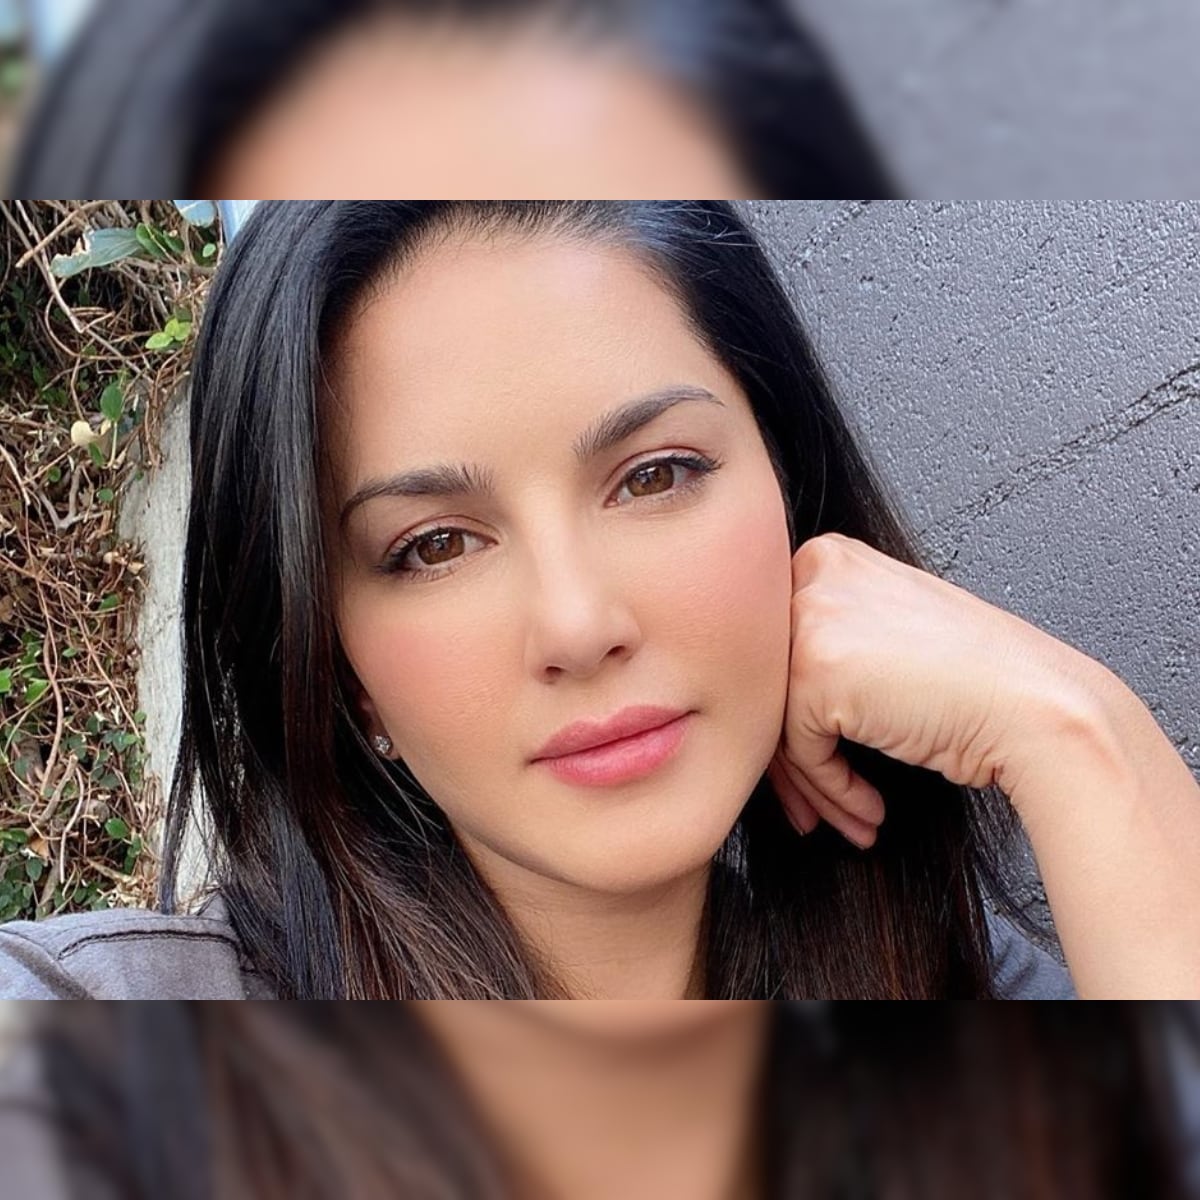 Sonilevan - It's Funny How People Who Know Least About You Always Have Most to Say,  Says Sunny Leone